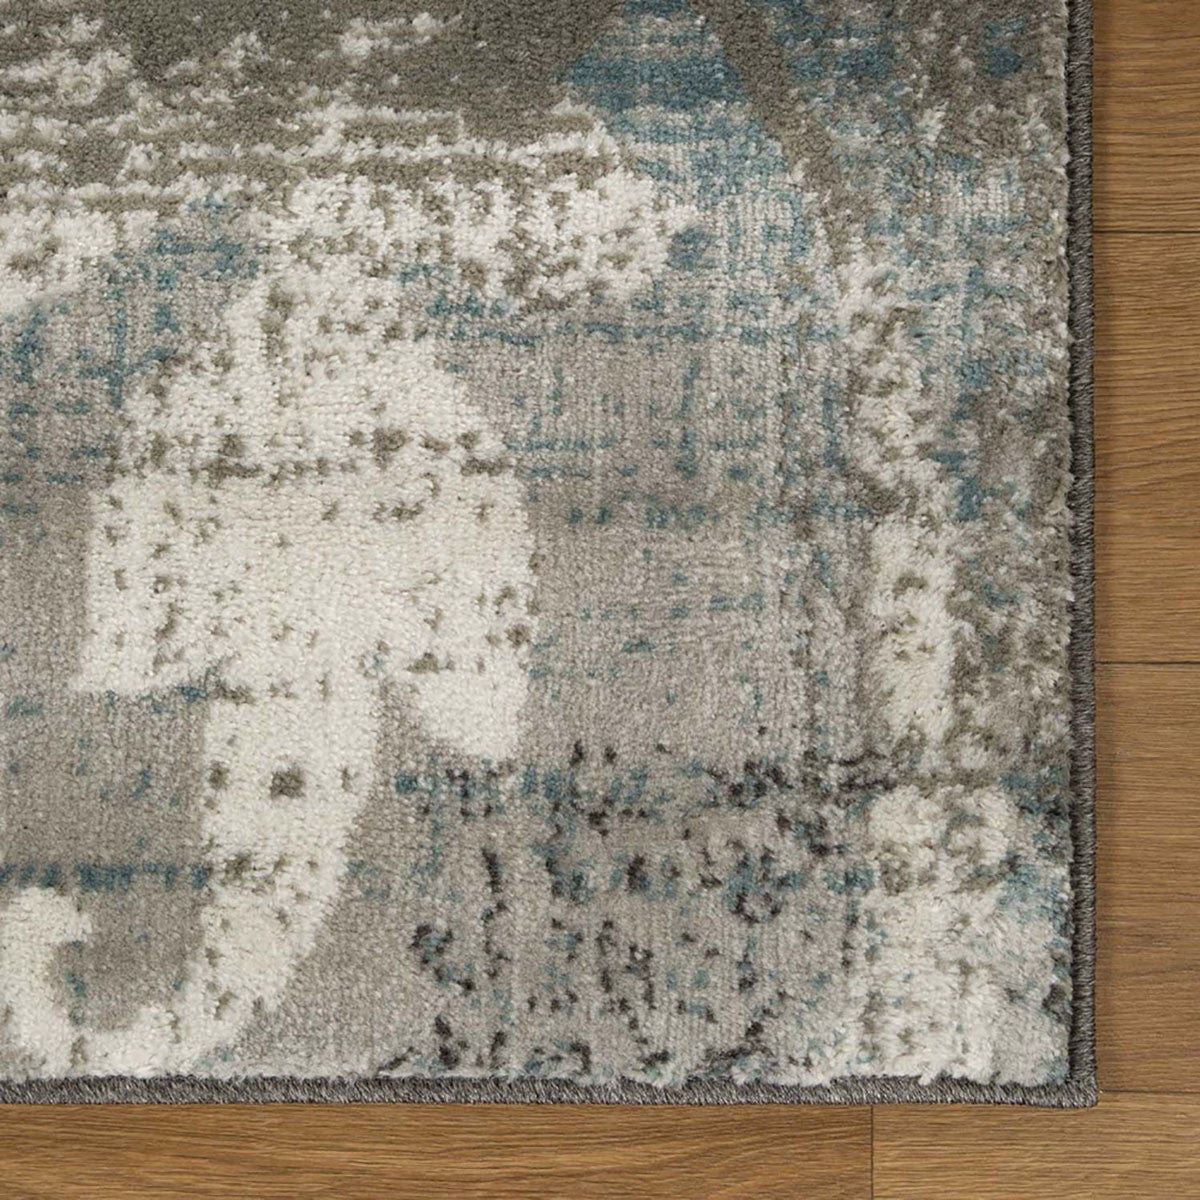 5' X 8' Teal Gray And Tan Floral Power Loom Distressed Stain Resistant Area Rug